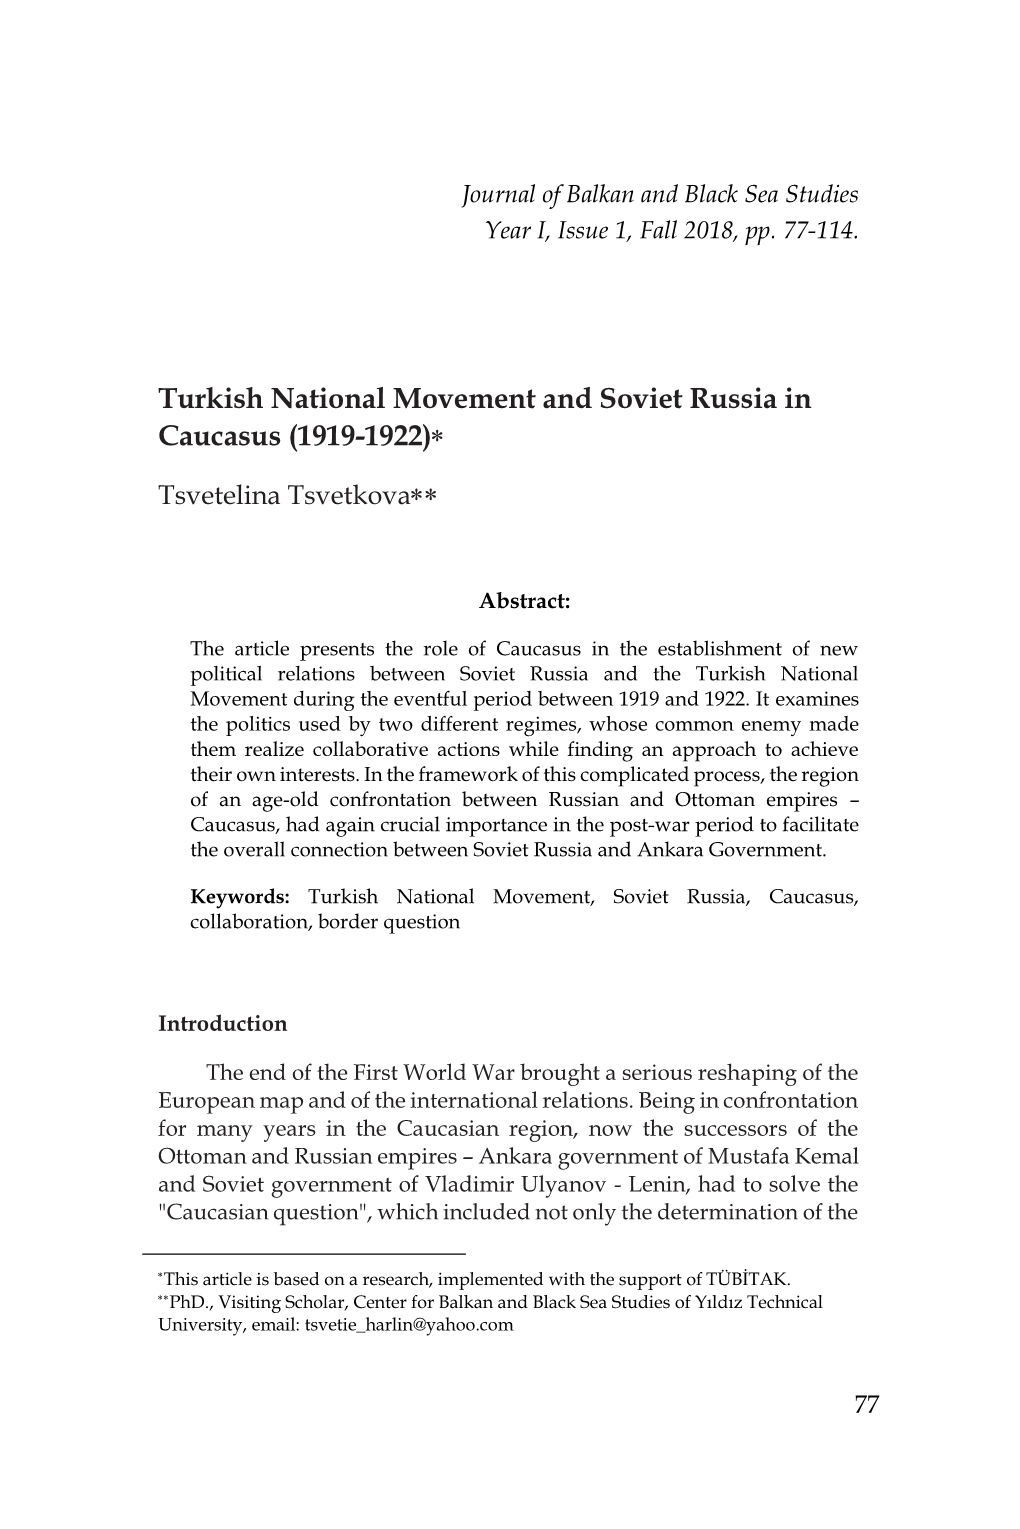 Turkish National Movement and Soviet Russia in Caucasus (1919-1922)